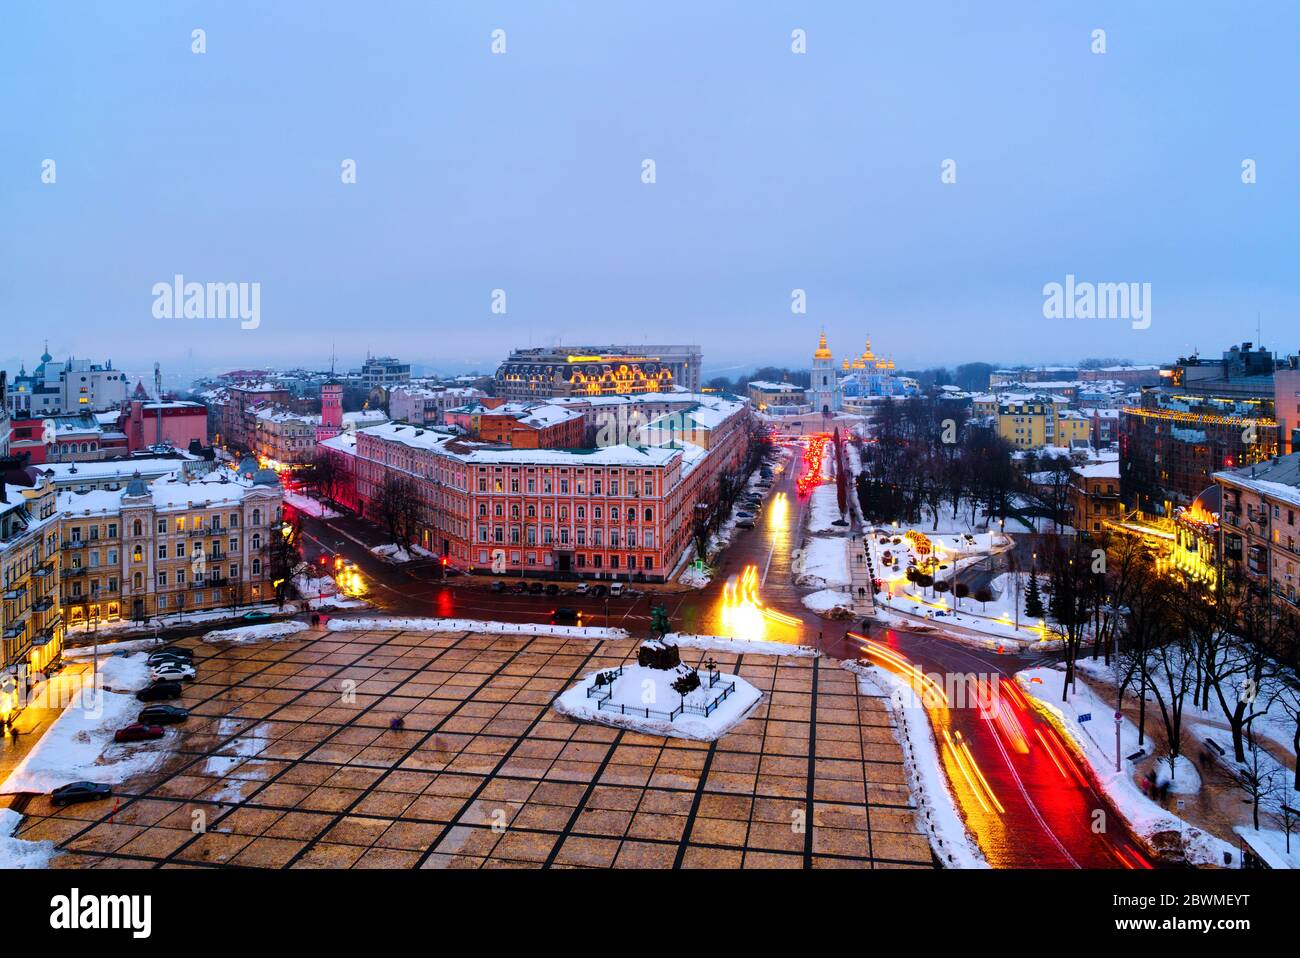 Kyiv, Ukraine. Aerial view of Kyiv, Ukraine, with a view of the St Michaels Golden - Domed Monastery and traffic on a winter evening with a gloomy sky Stock Photo